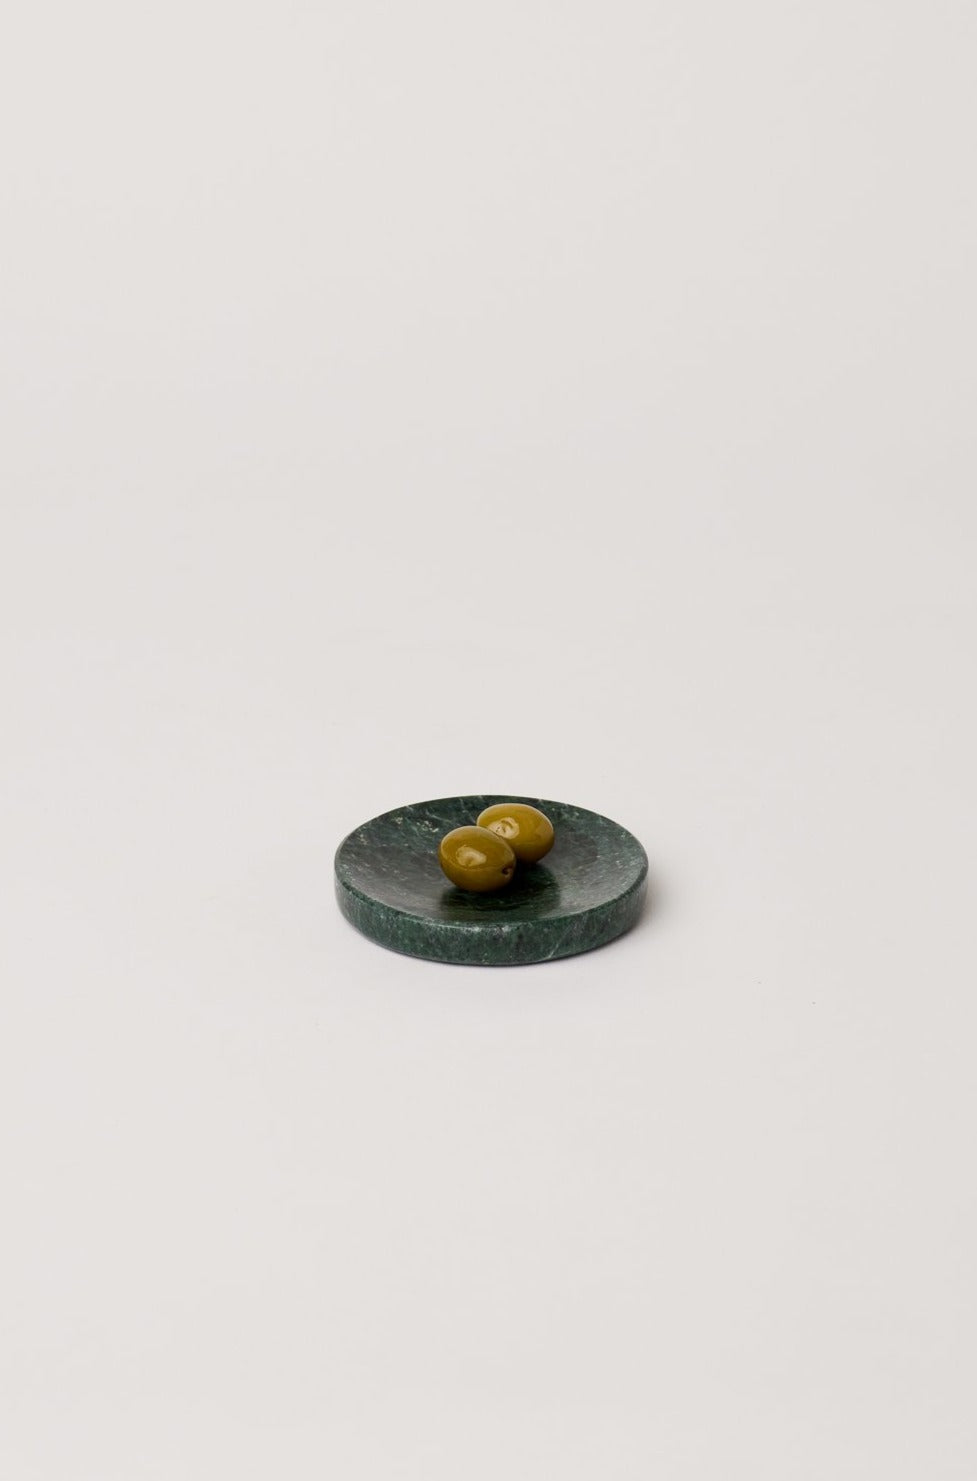 Fleck Green Marble Dipping Bowls With olives